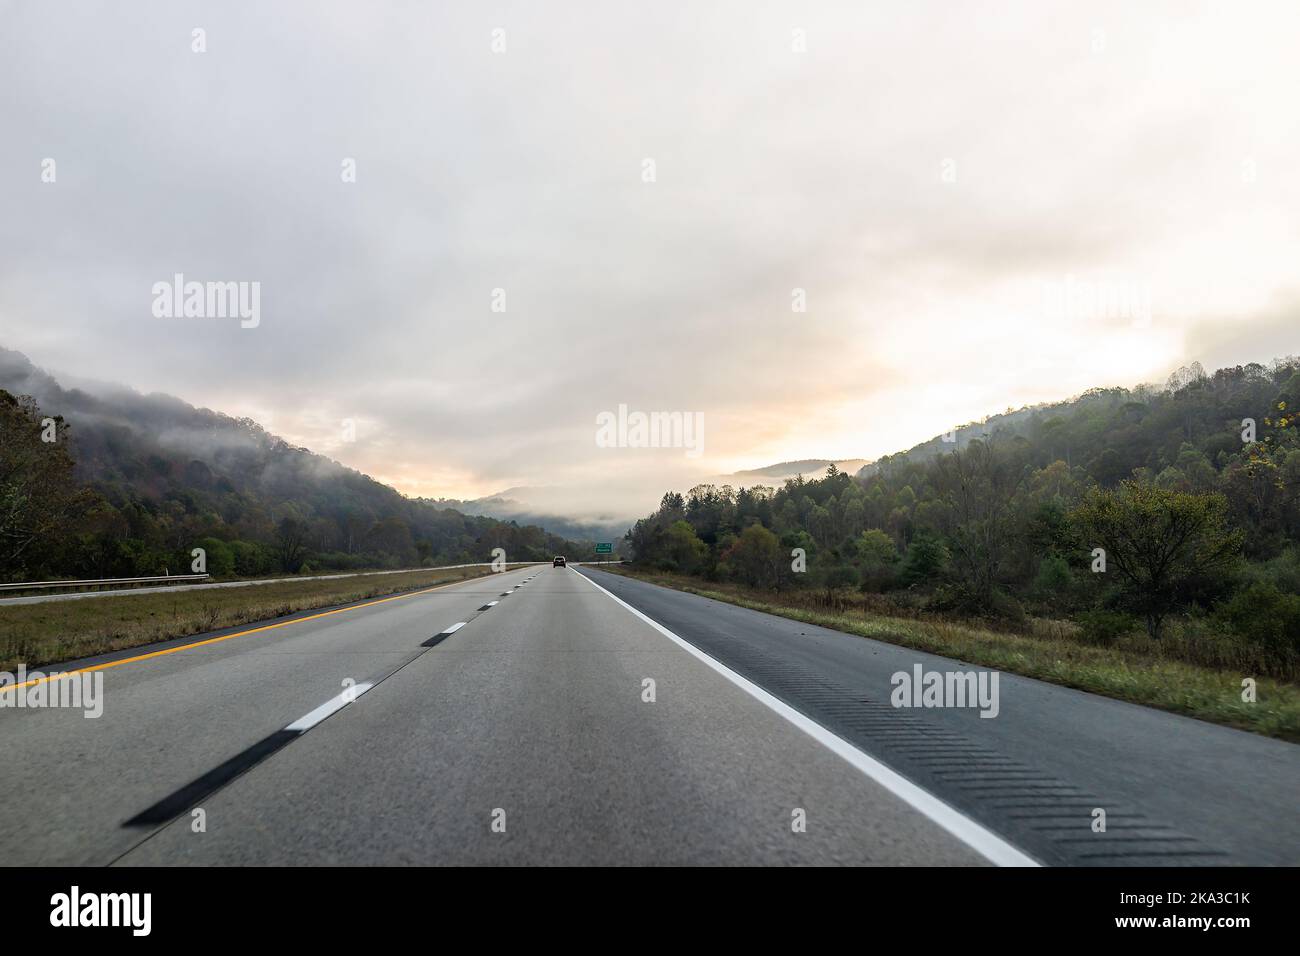 Fog mist weather in morning sunrise on road highway 64 driving in rural countryside in West Virginia with cars in traffic and sign for exit to Rainell Stock Photo